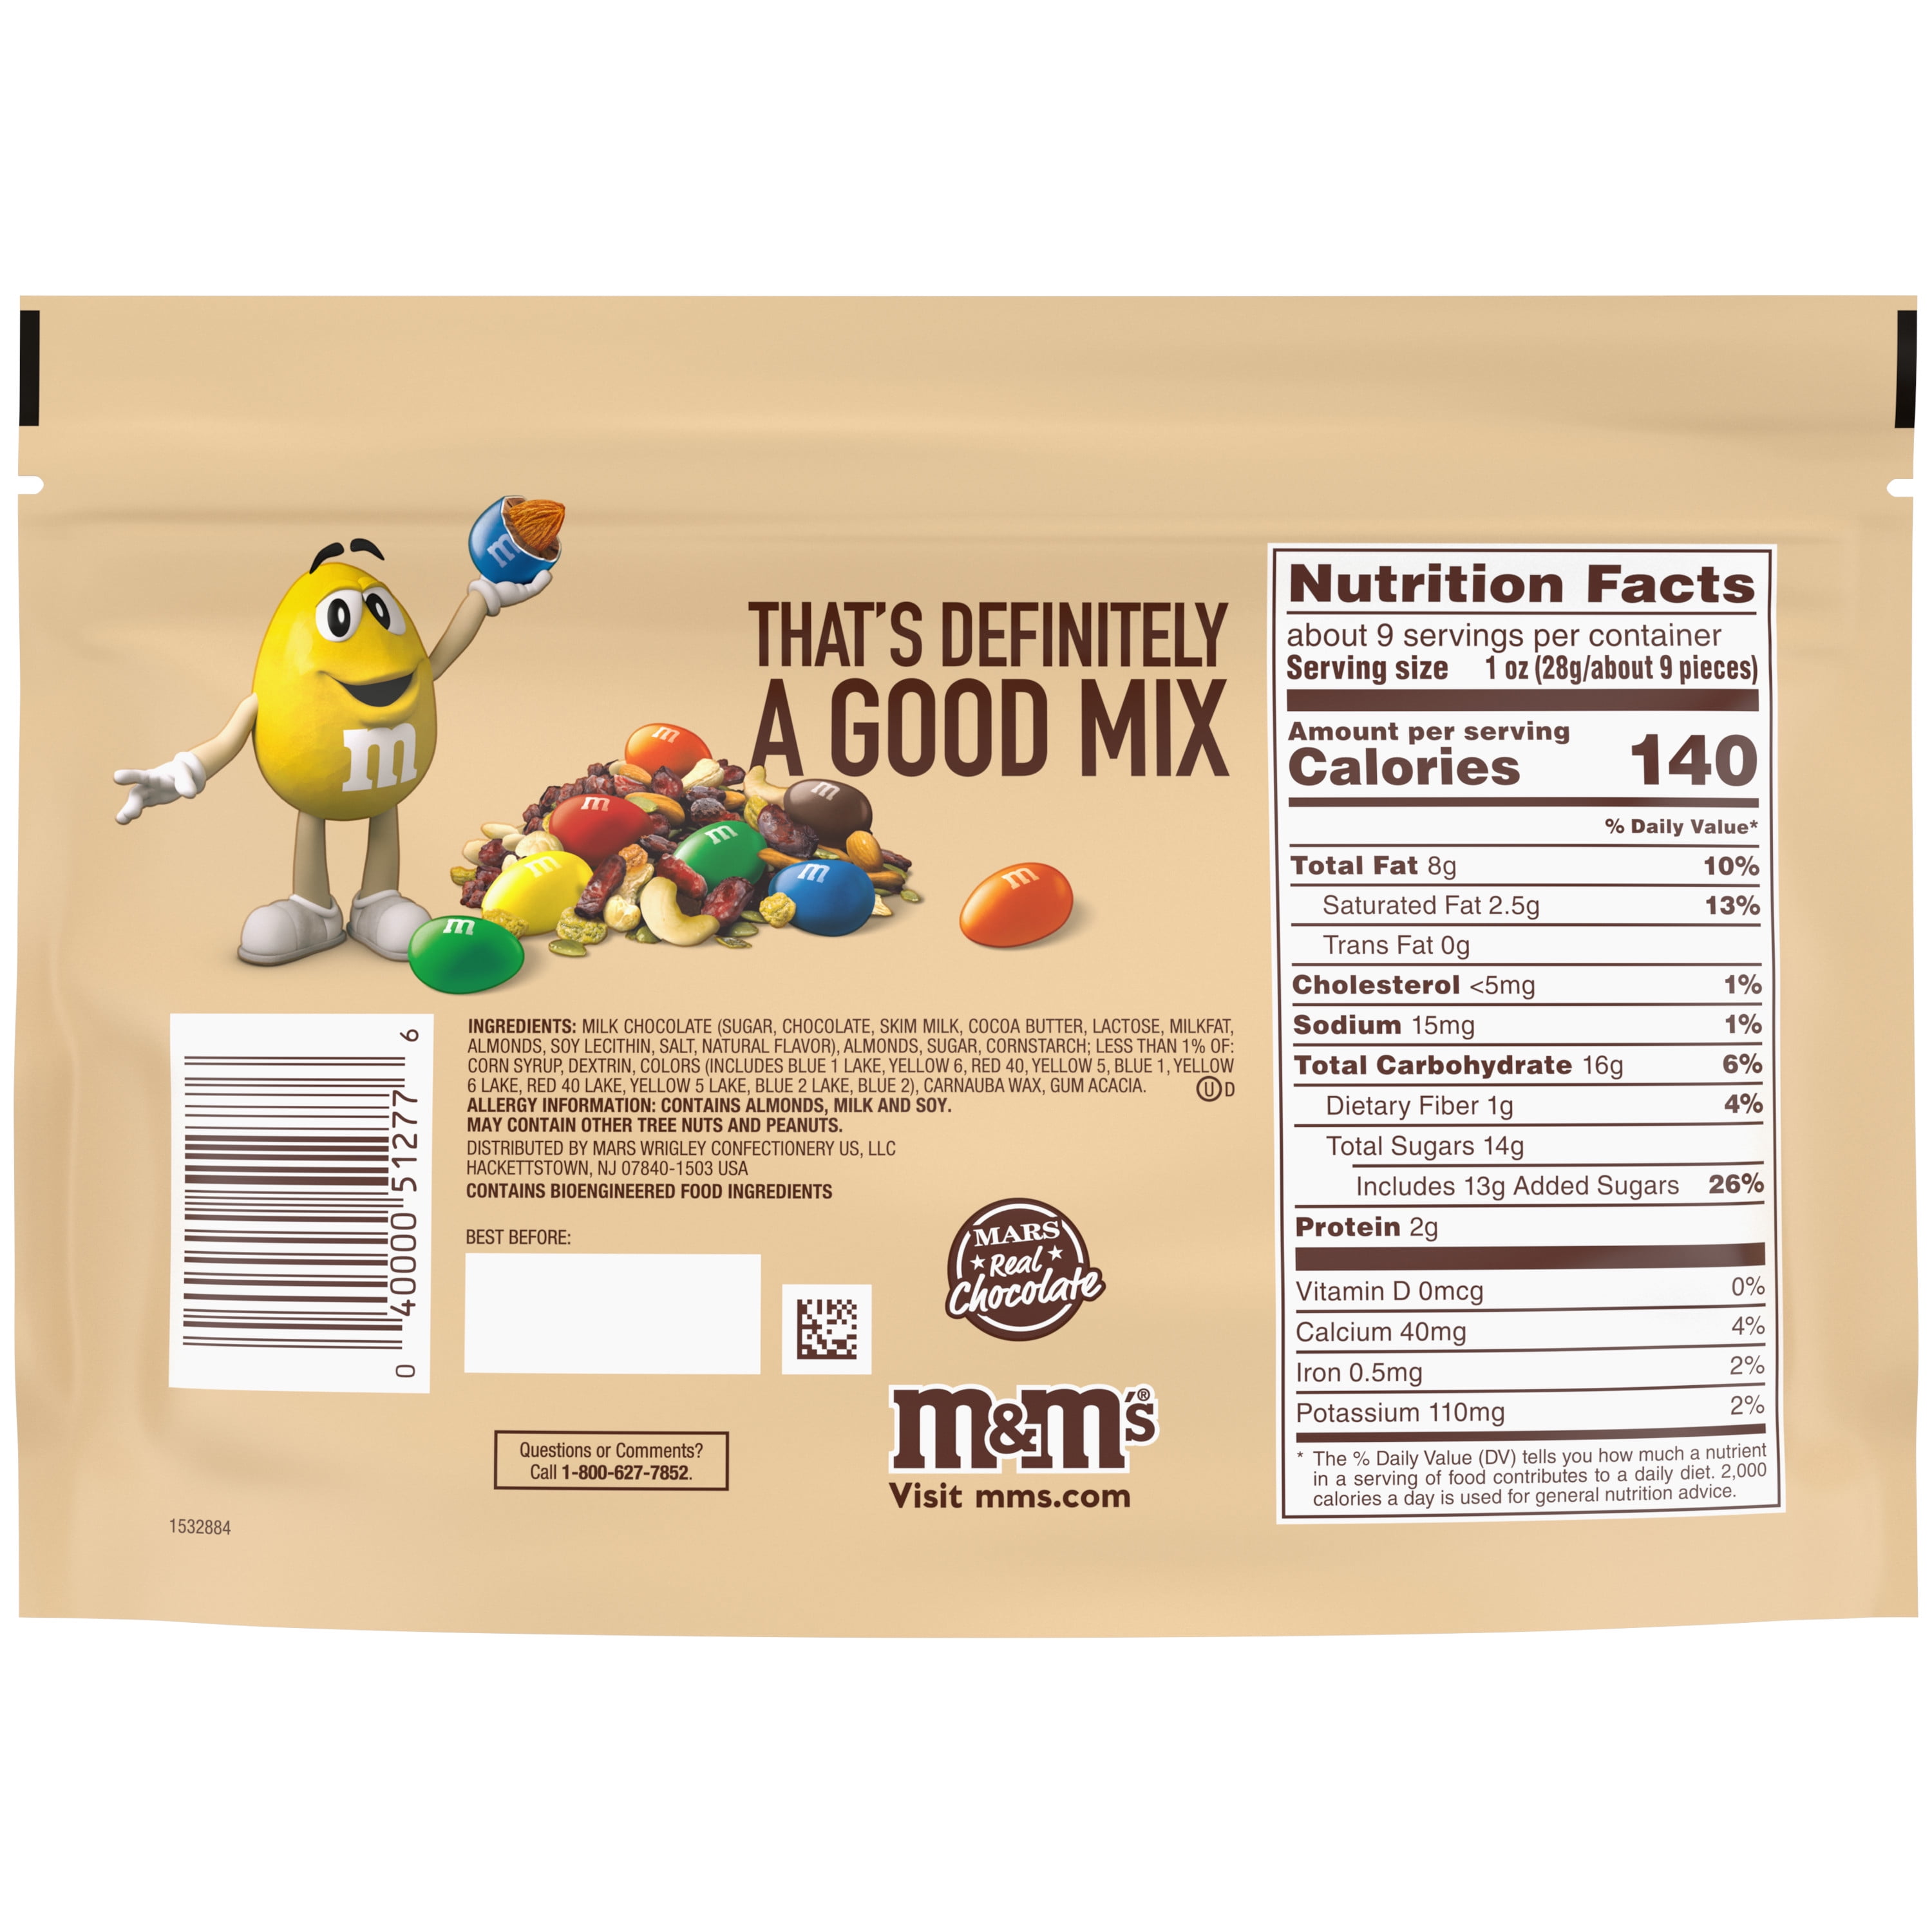 M&M's Almond Share Size - 2.83 oz/18 pack